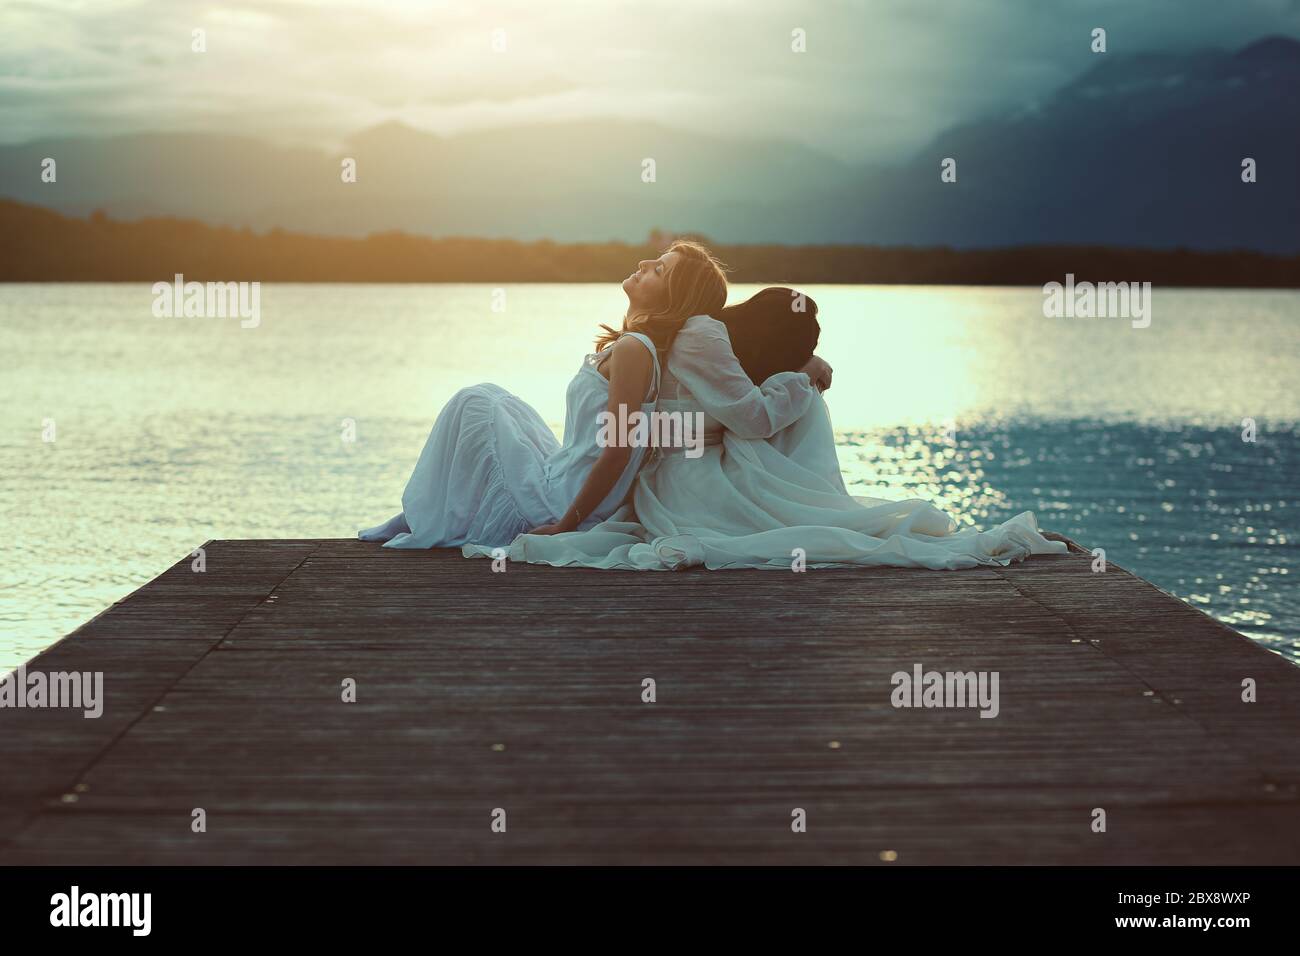 Two women sharing sunset light . Surreal and ethereal Stock Photo